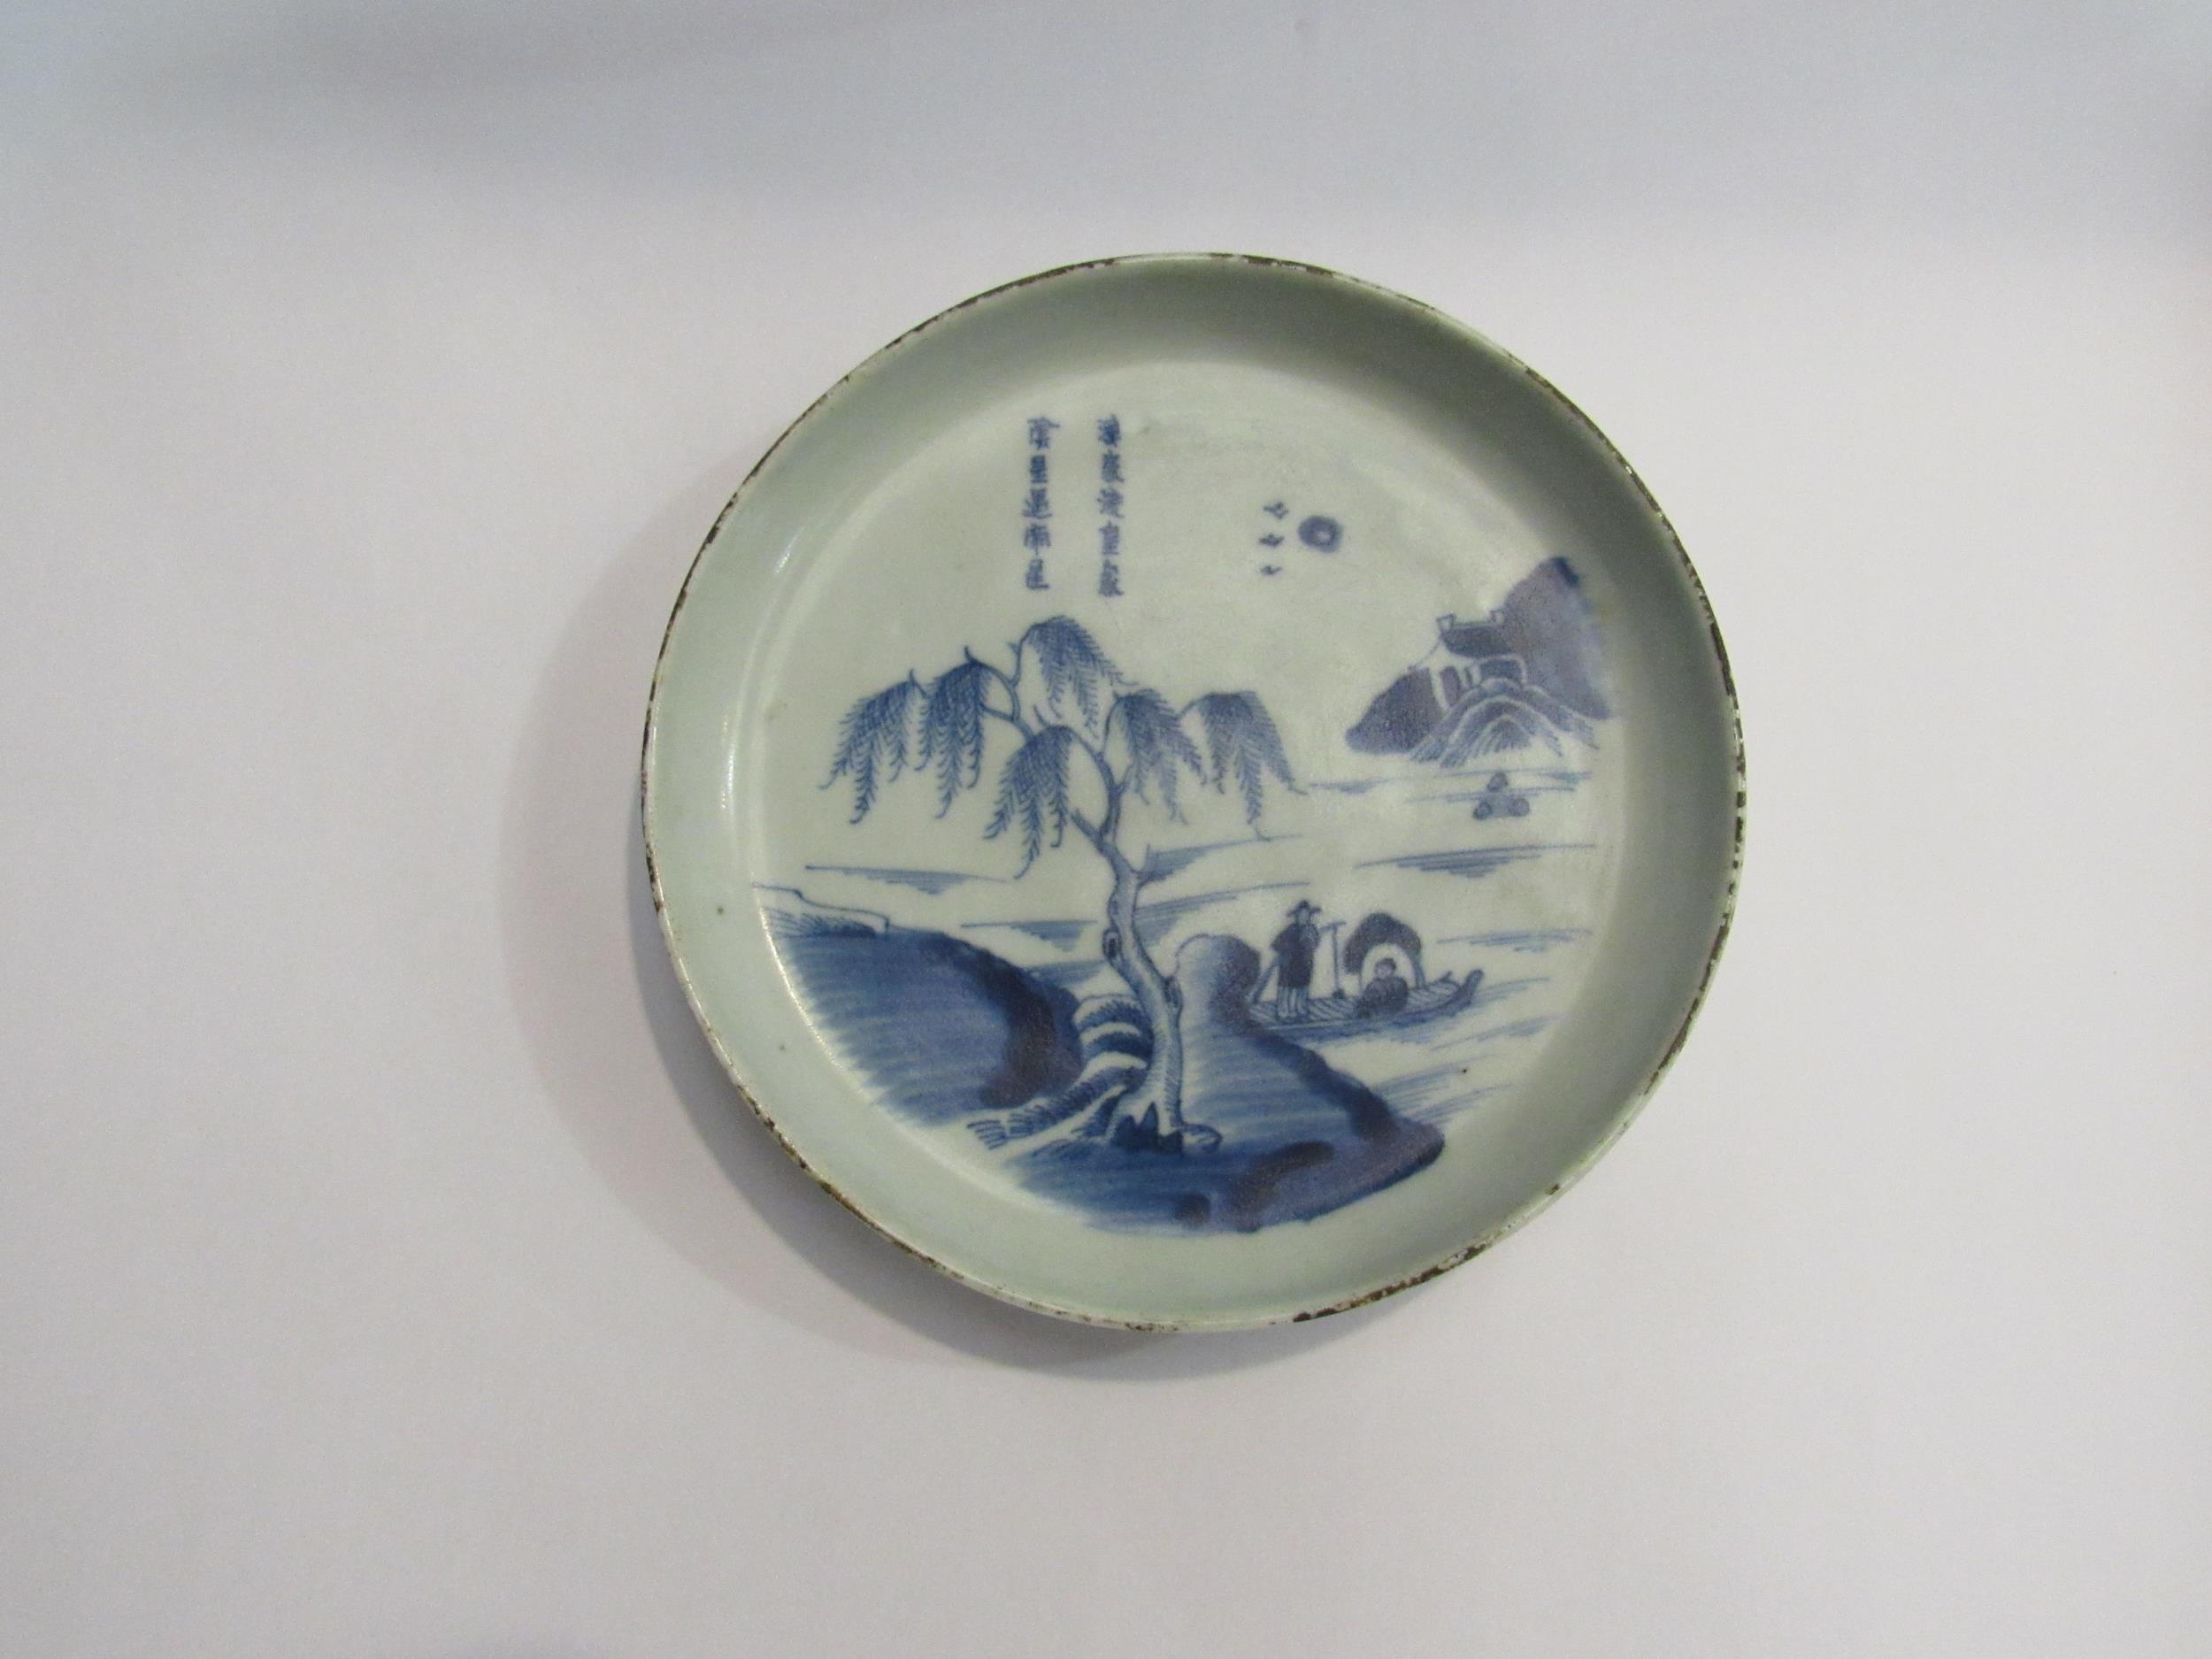 A Chinese blue and white dish with scene of figures on a raft, character marks to front and marked